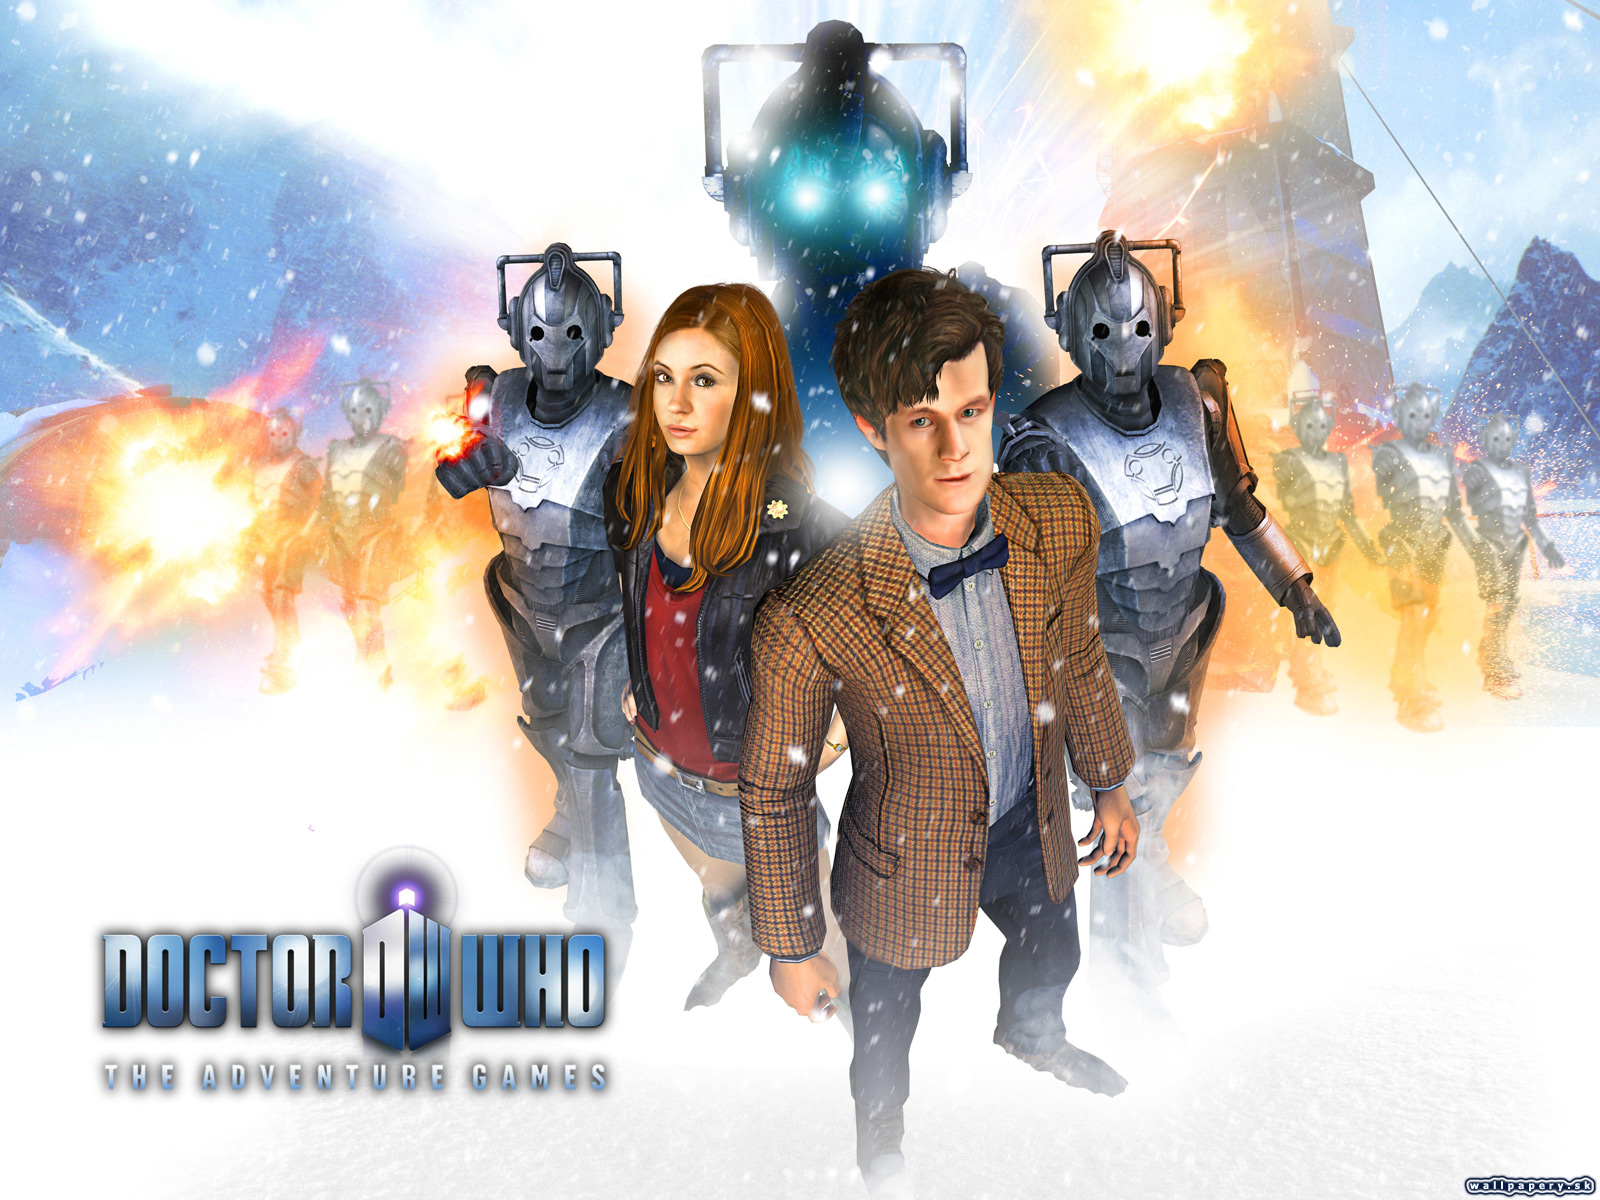 Doctor Who: The Adventure Games - Blood of the Cybermen - wallpaper 1